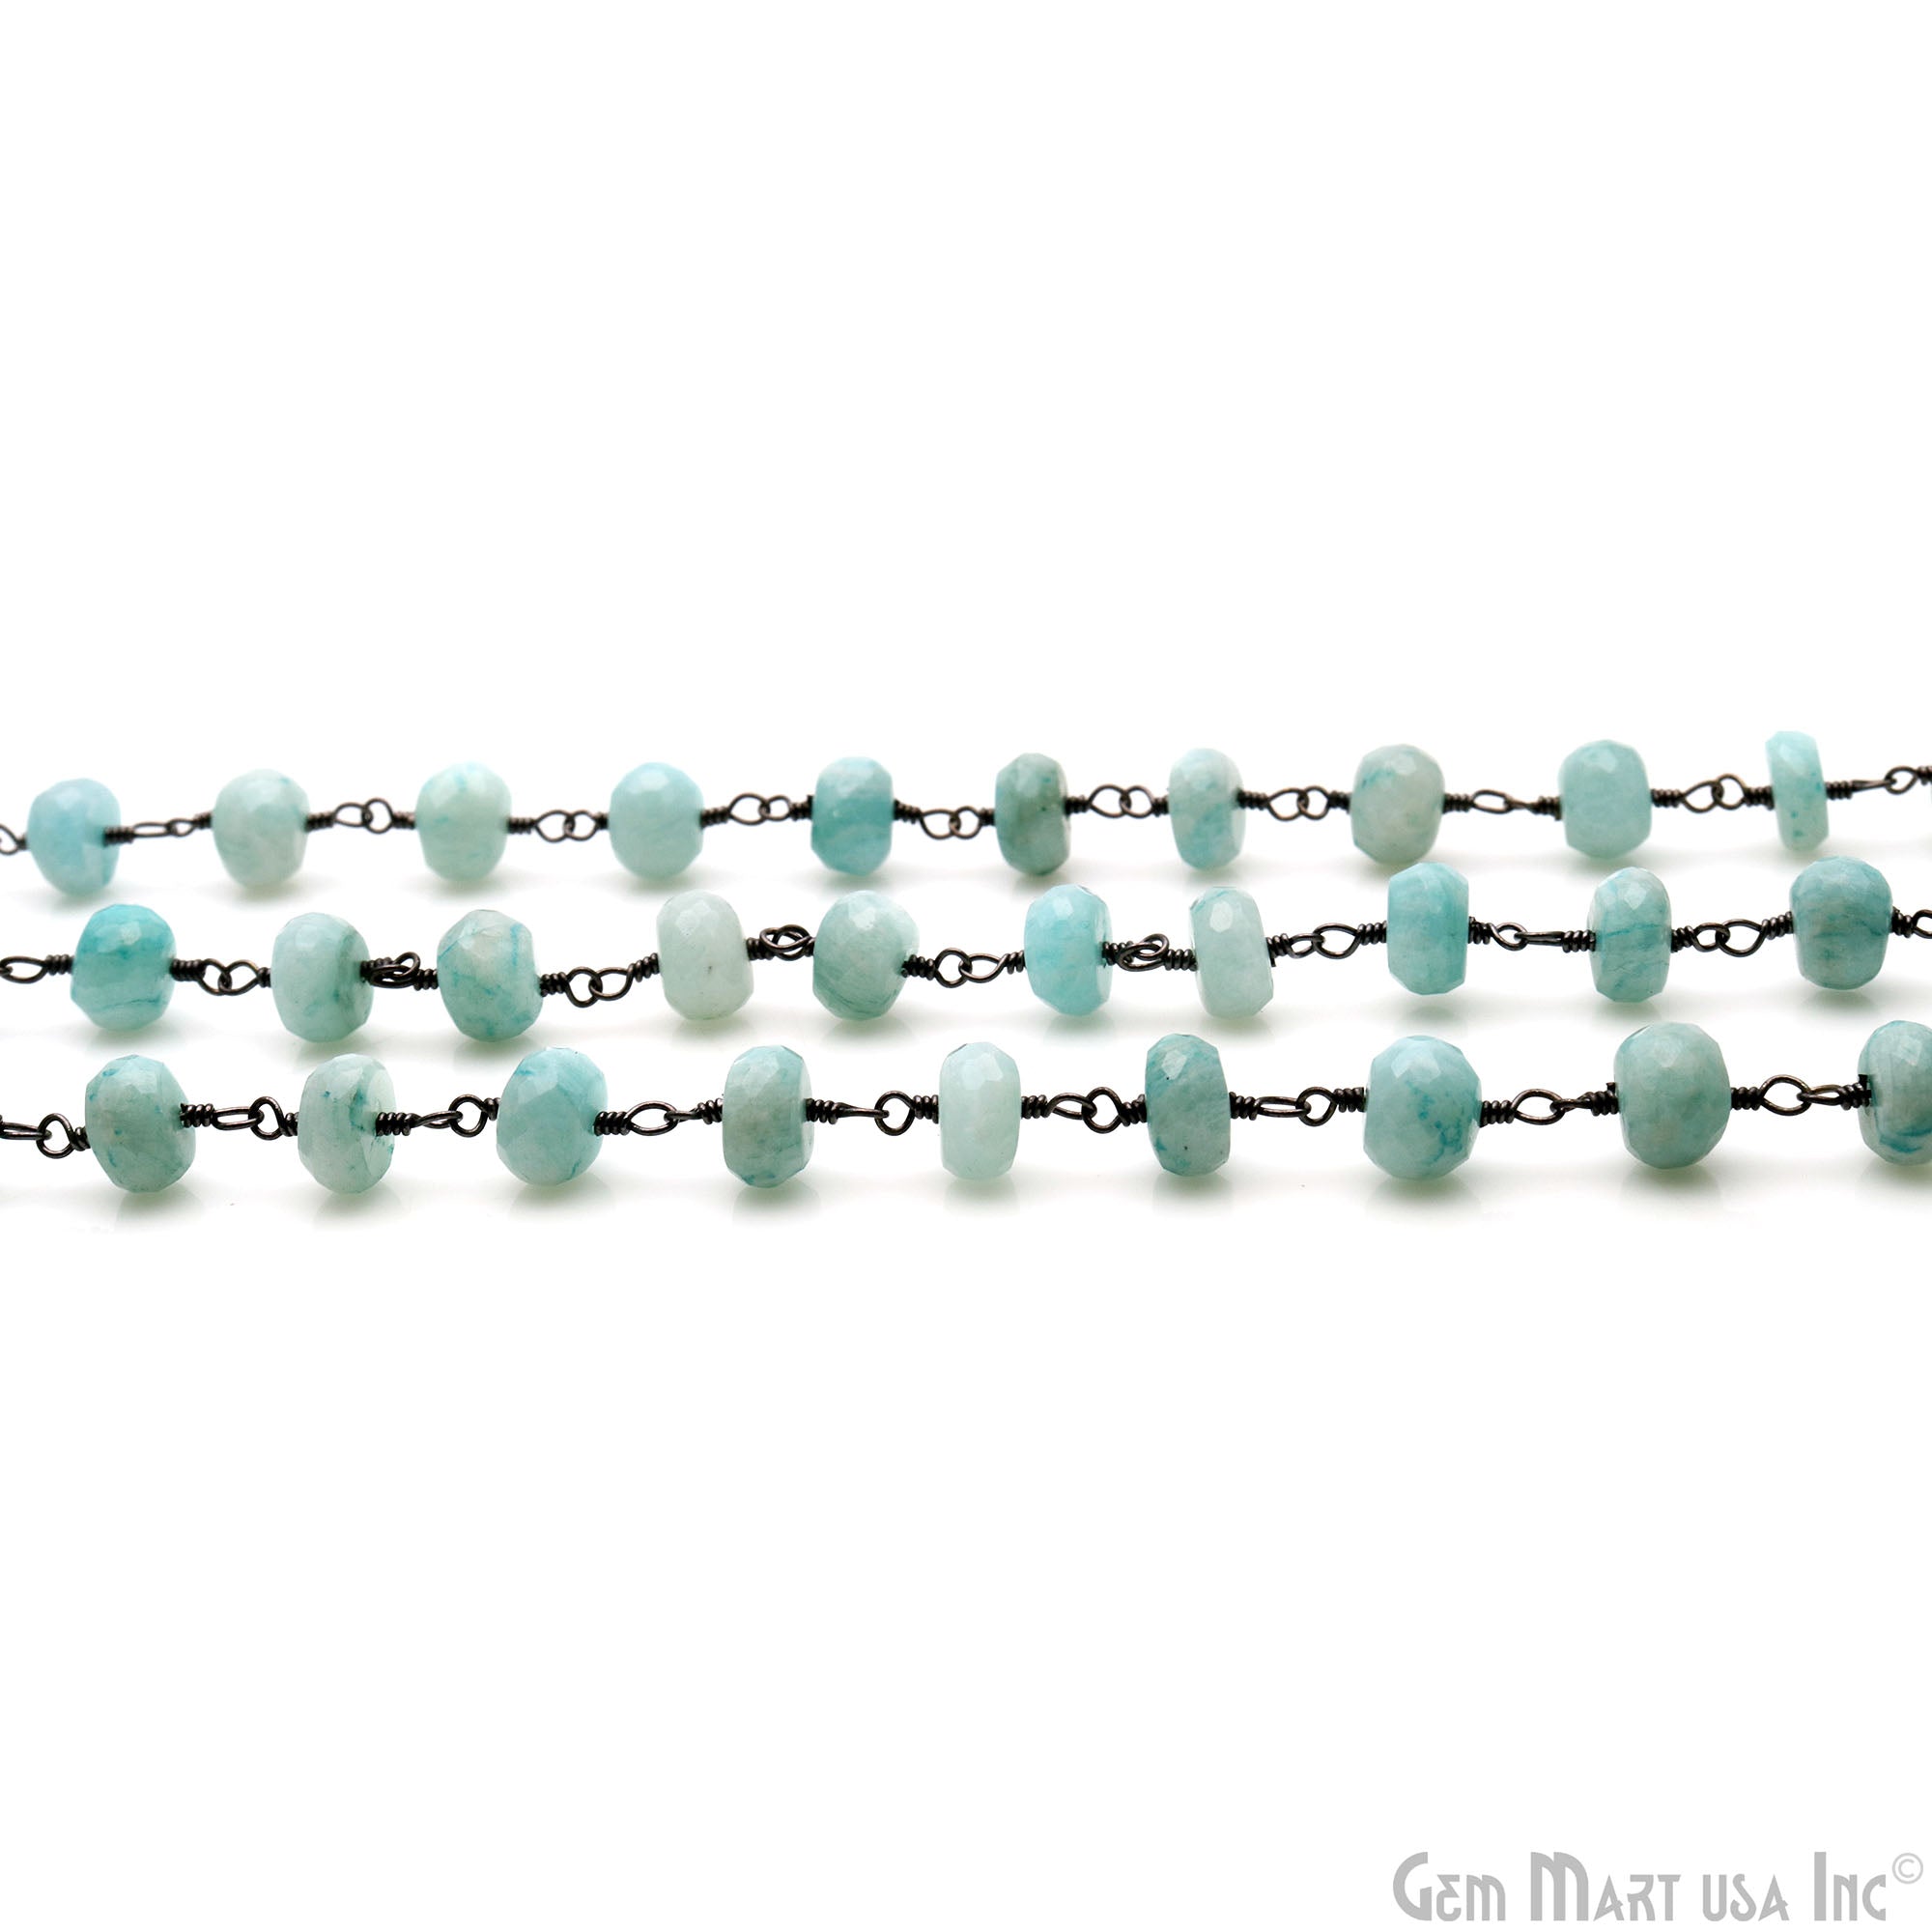 Amazonite Oxidized Wire Wrapped Rondelle Beads Chain (762817740847)